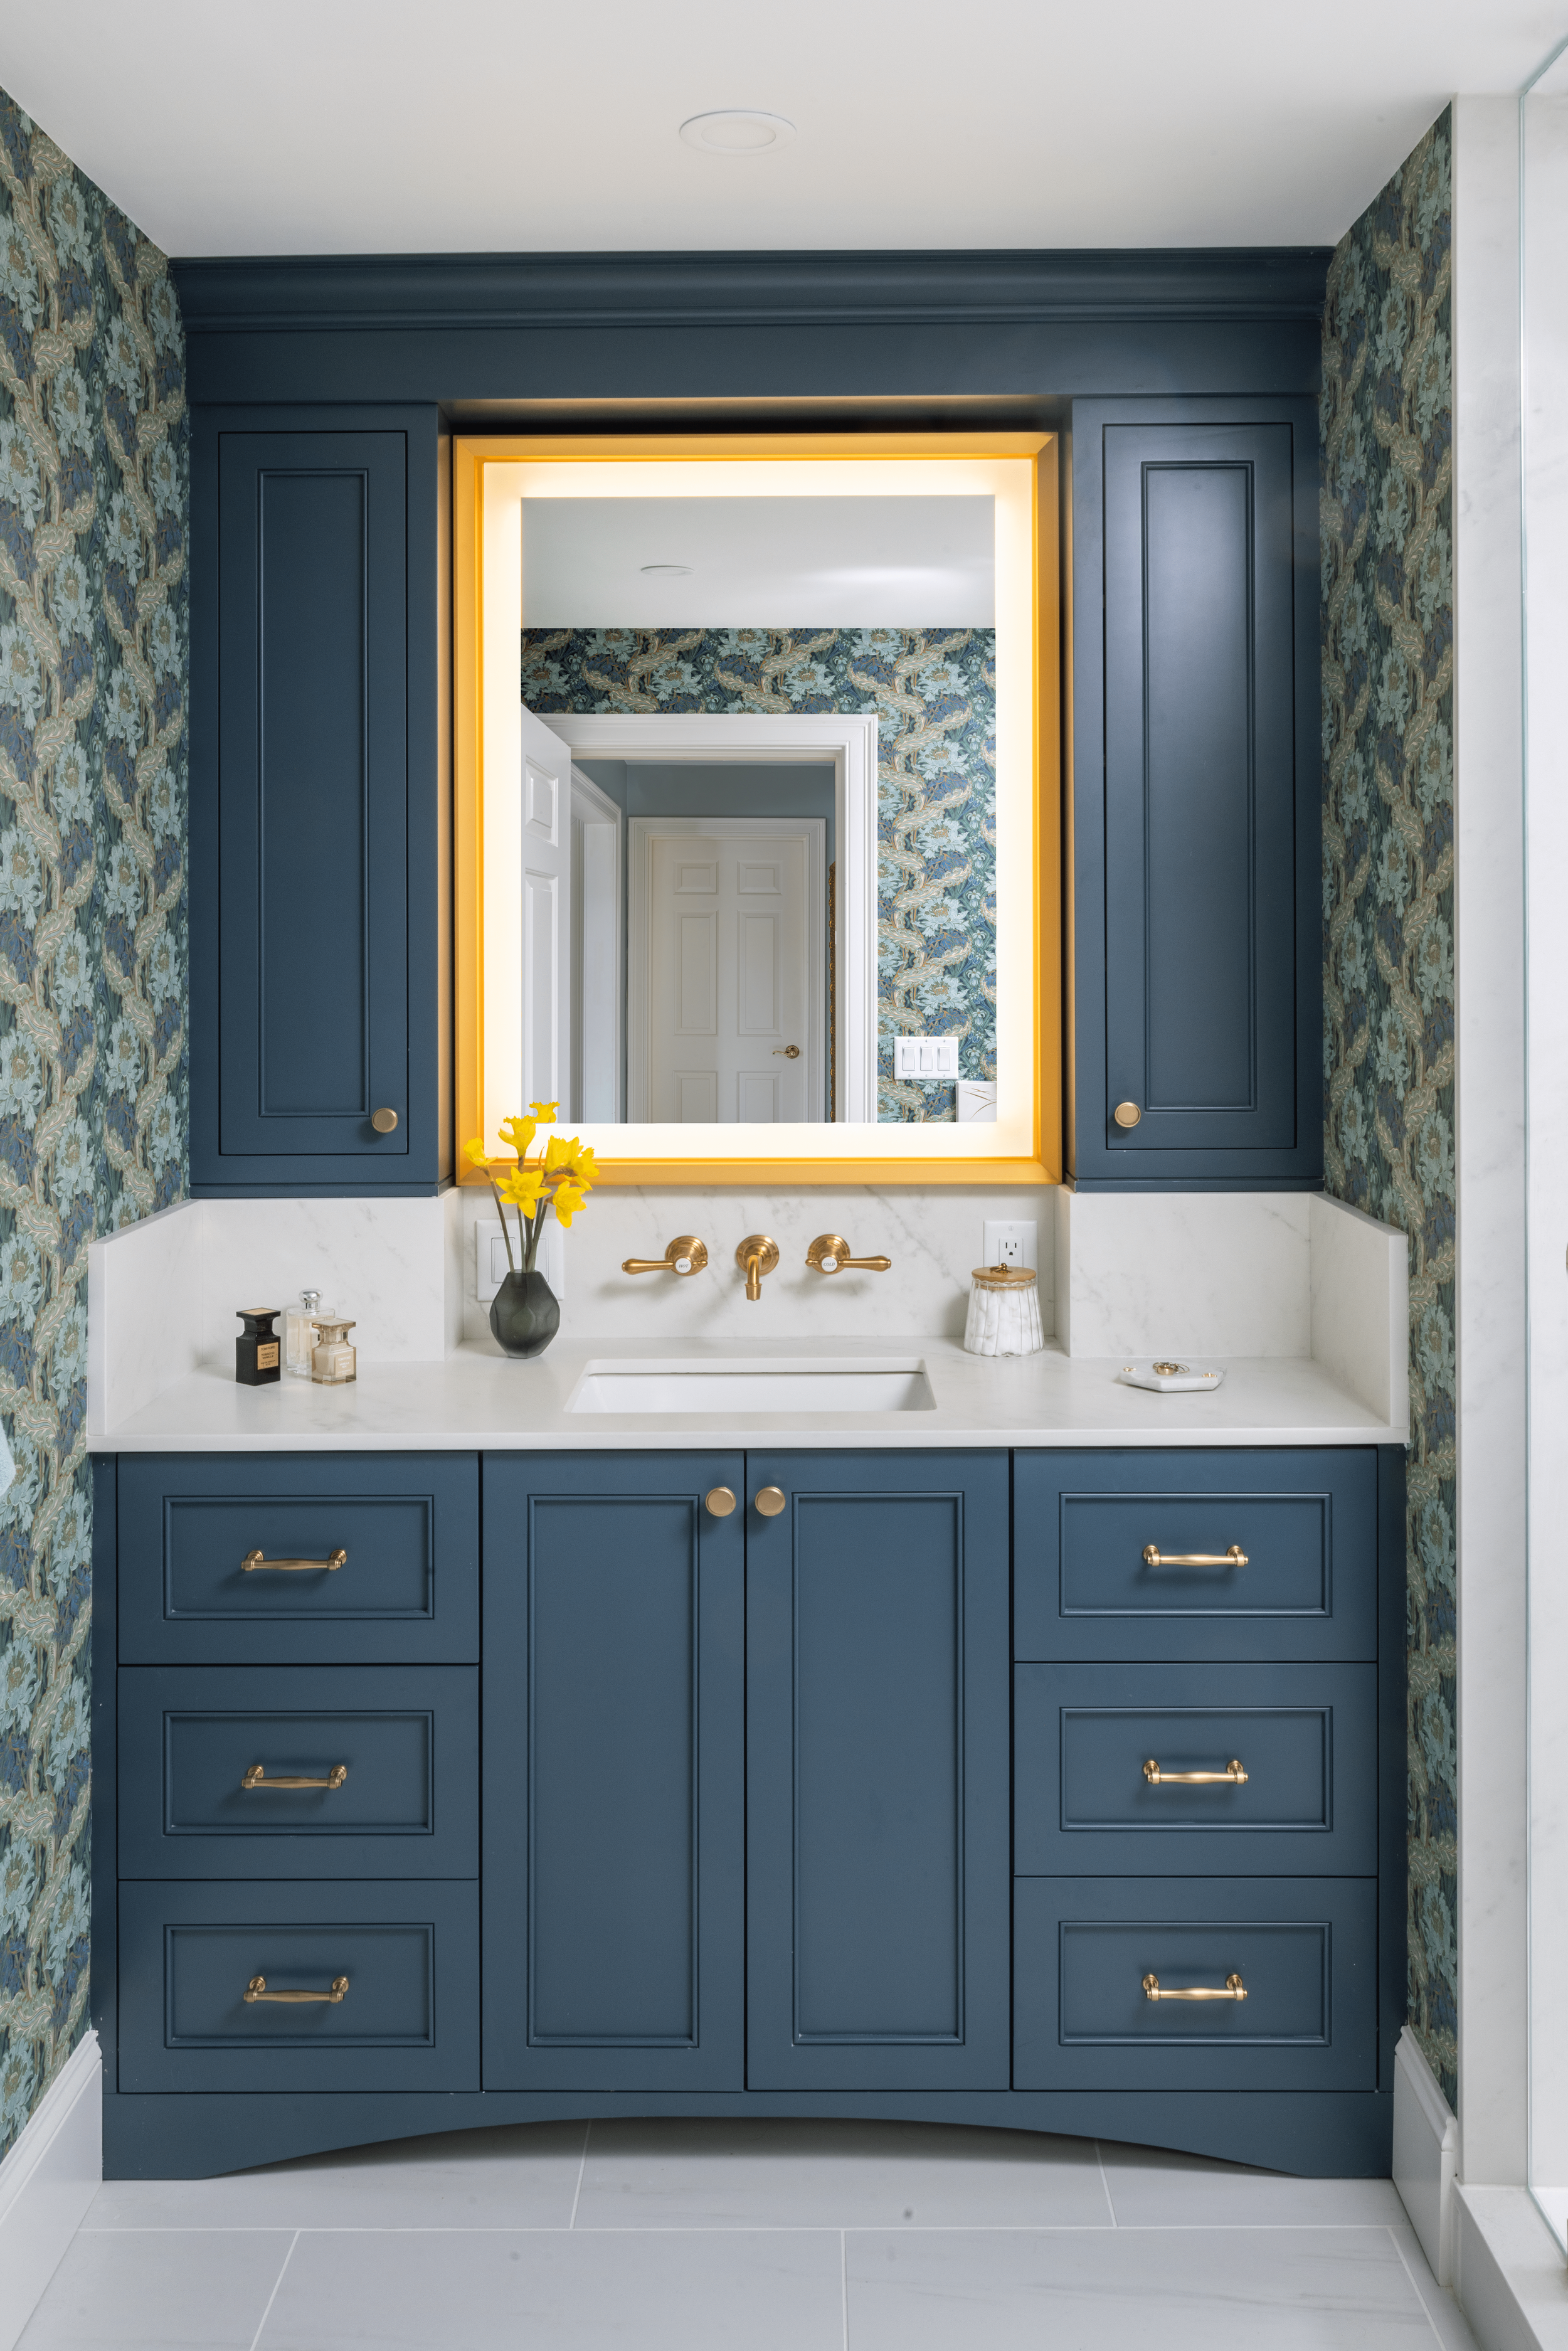 Teal Appeal Primary Bath Sudbury MAHer Vanity View  KITCHENVISIONS residential kitchen and bath design.png